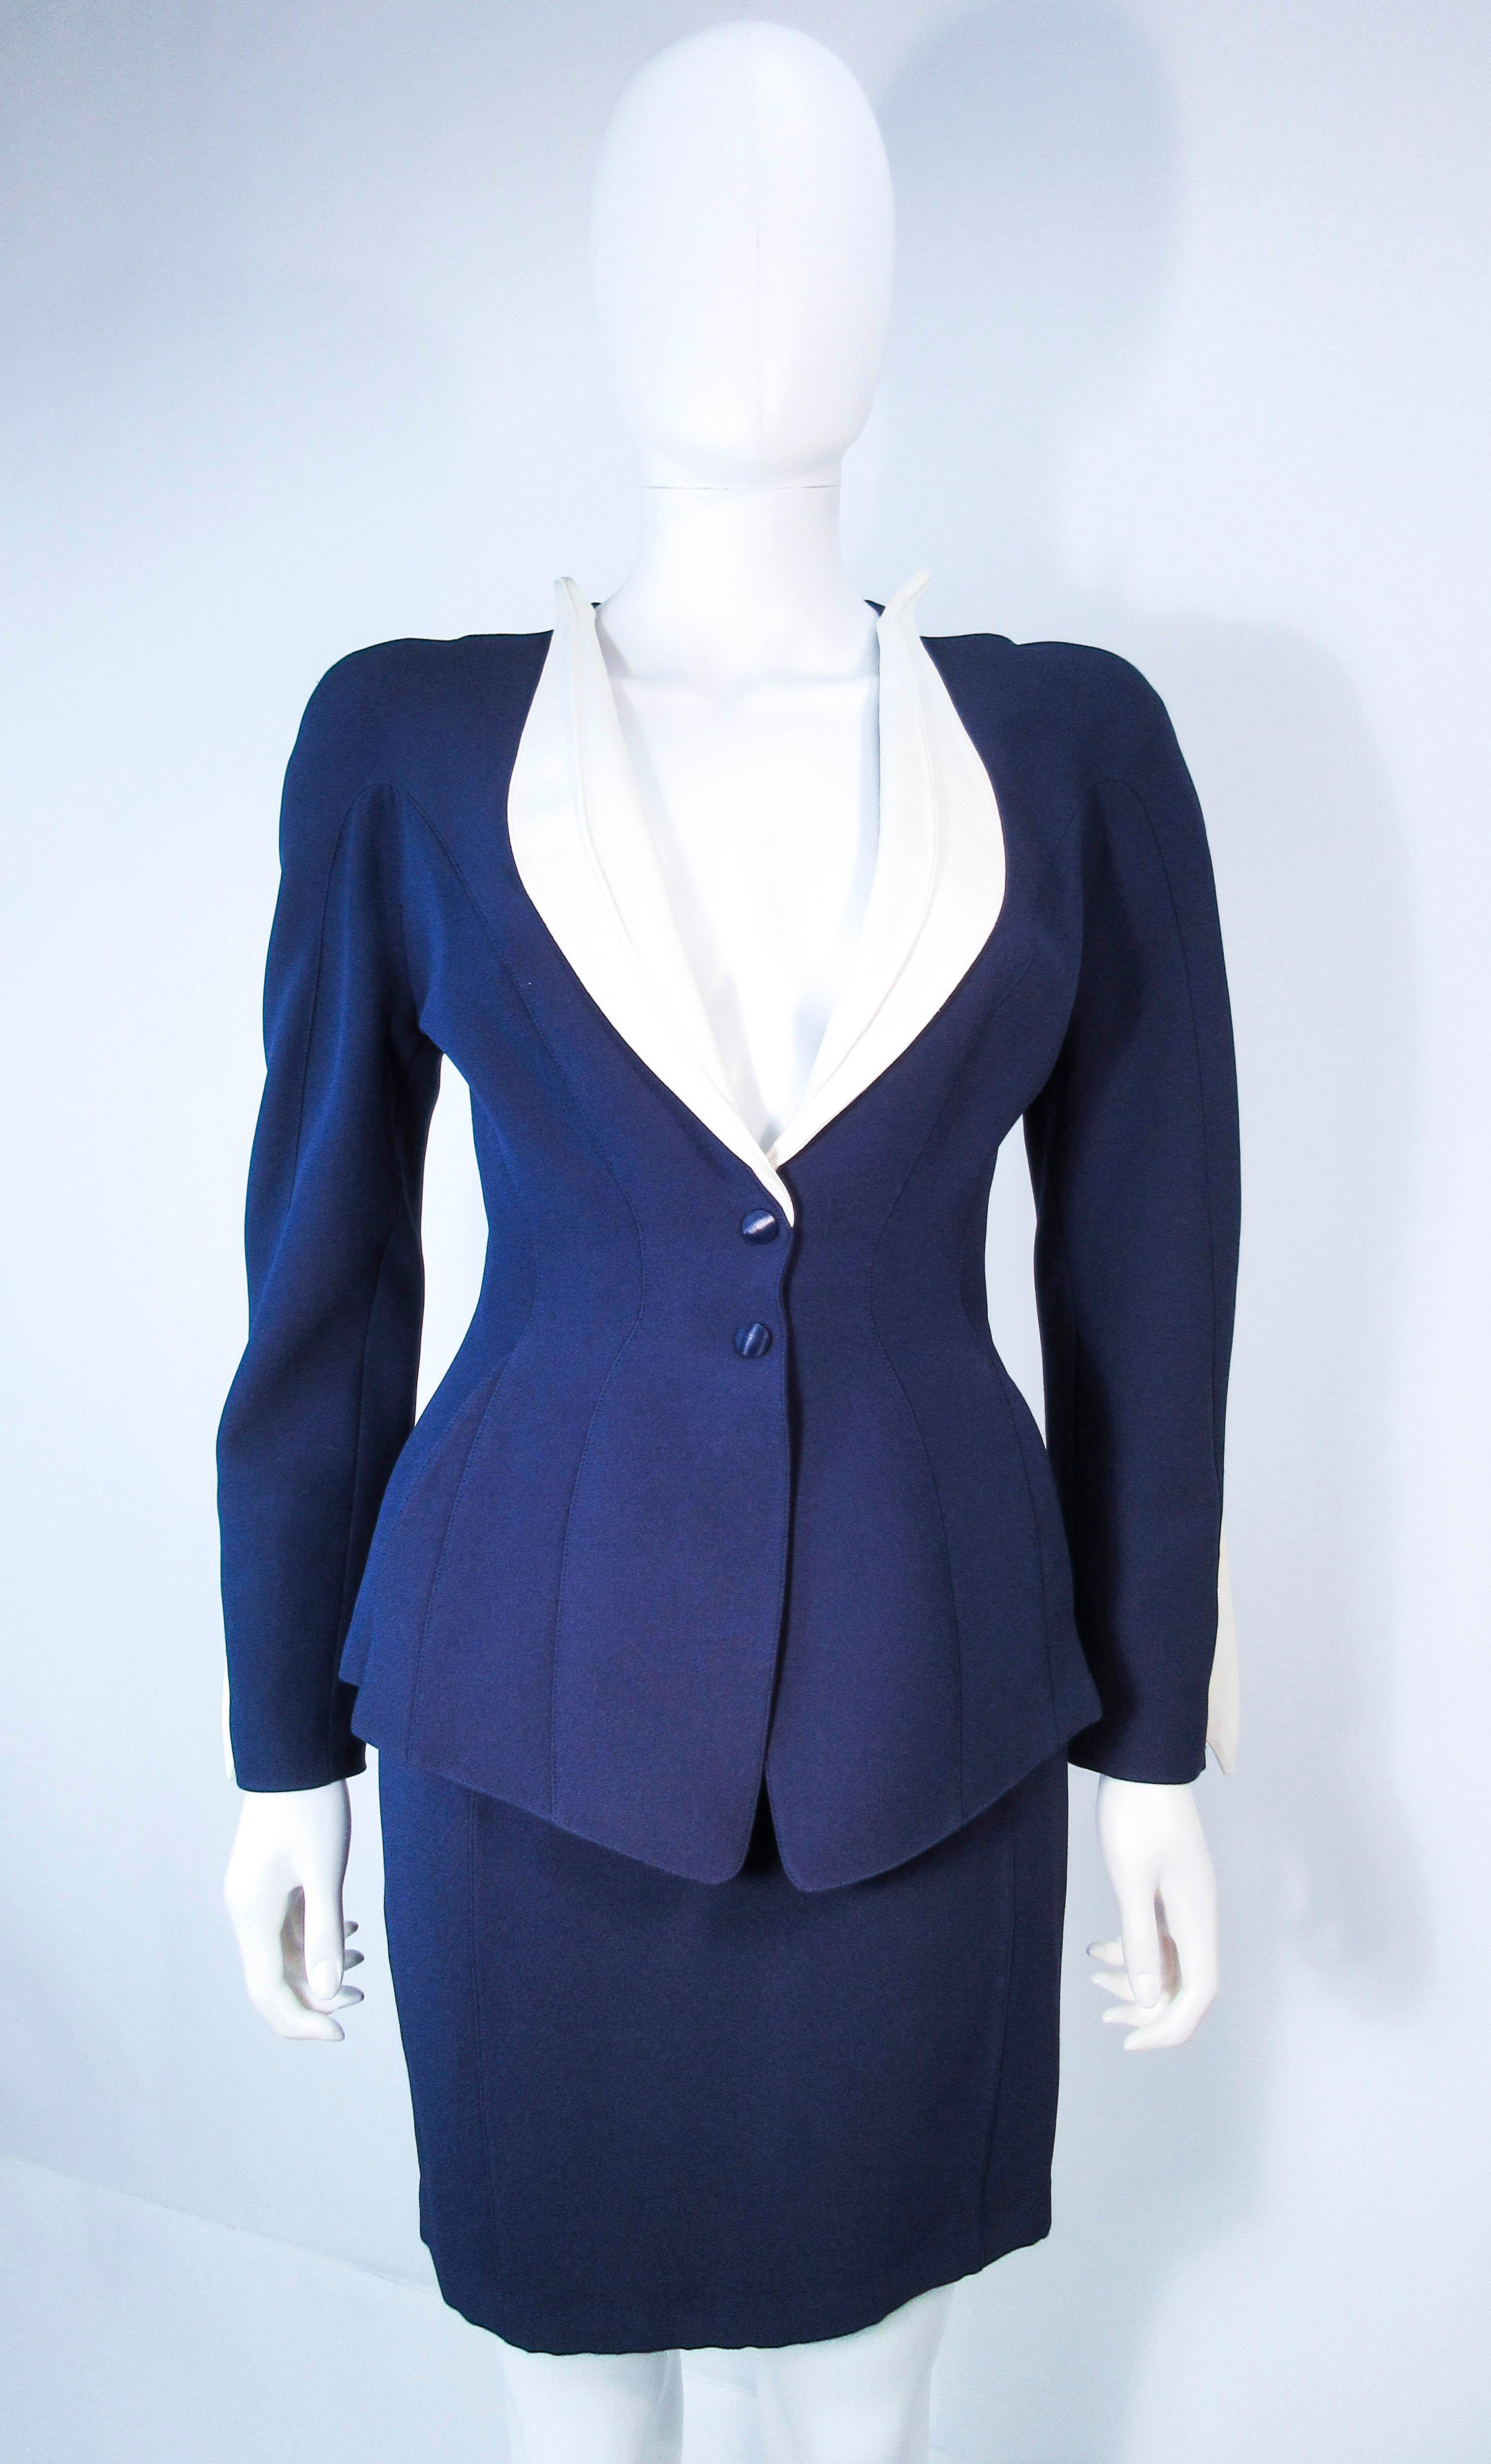 This Theirry Mugler skirt suit is composed of a viscose rayon blend.. The jacket features a peplum design with snap front closures, a contrasting white collar, and shoulder cut out details. The classic pencil style skirt features a zipper closure..